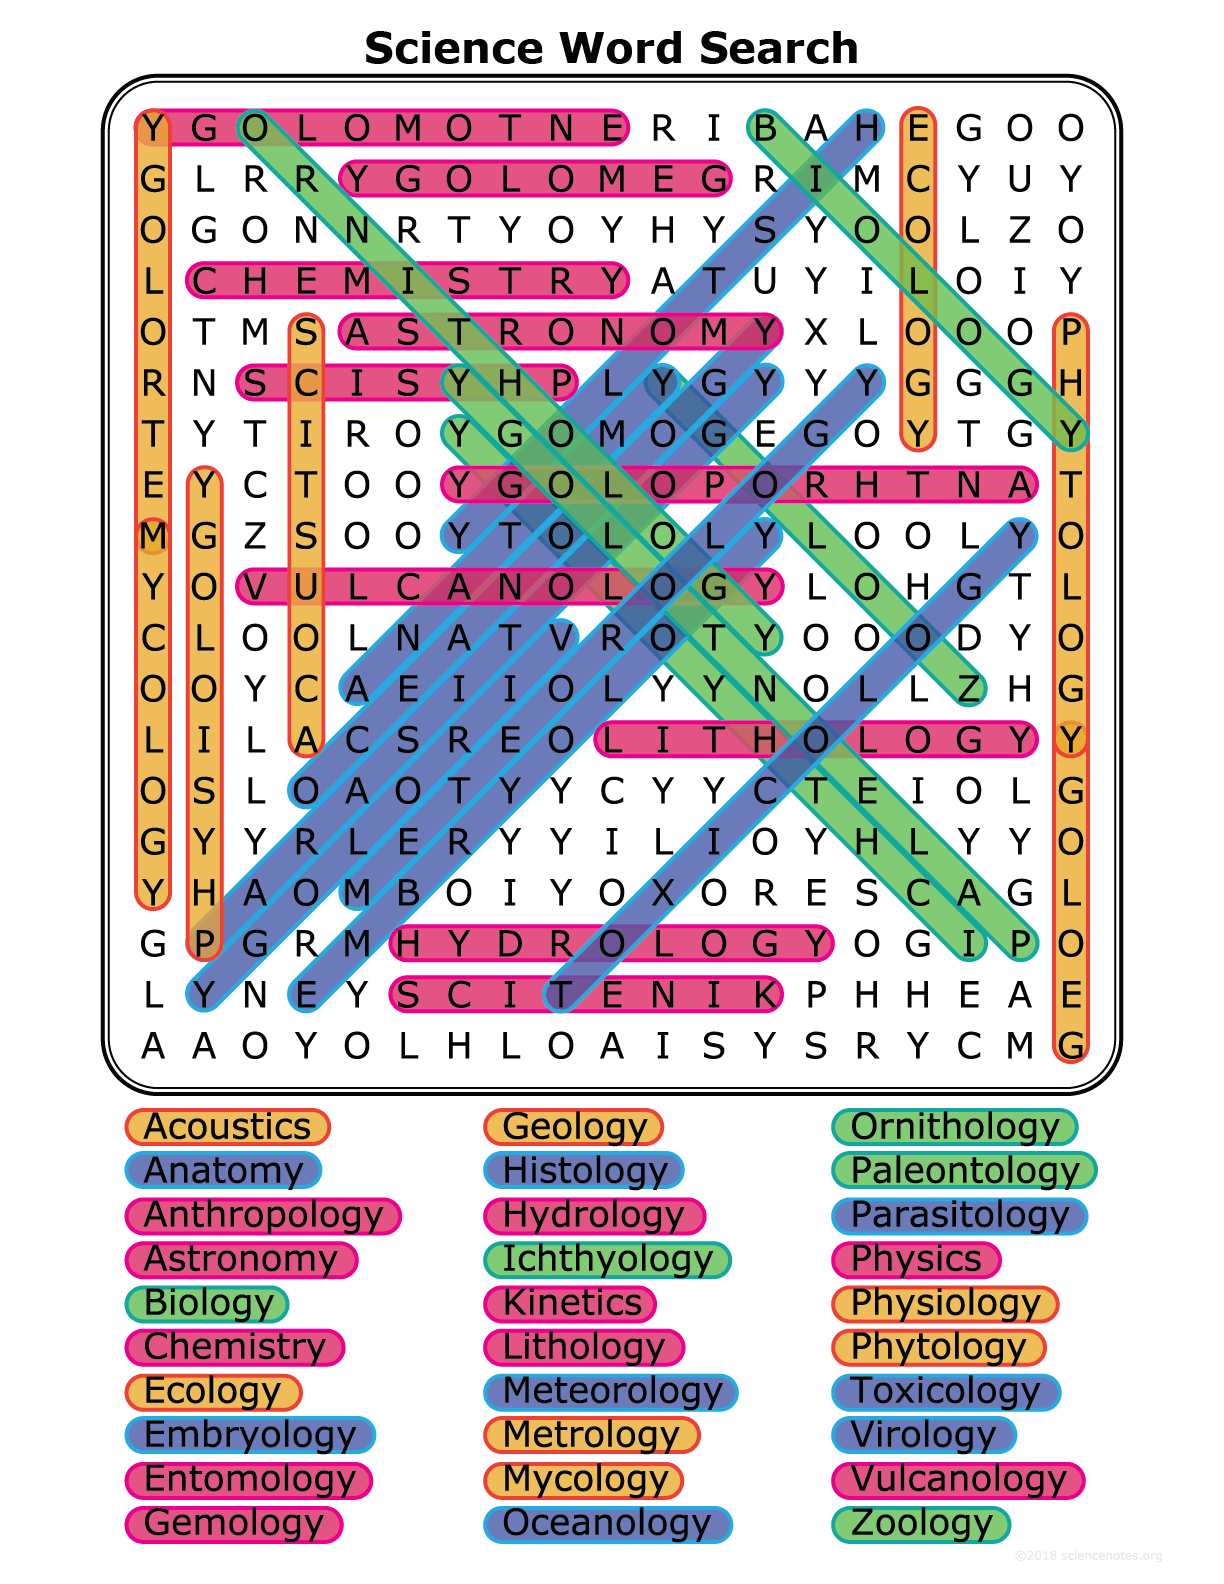 Science Disciplines Word Search